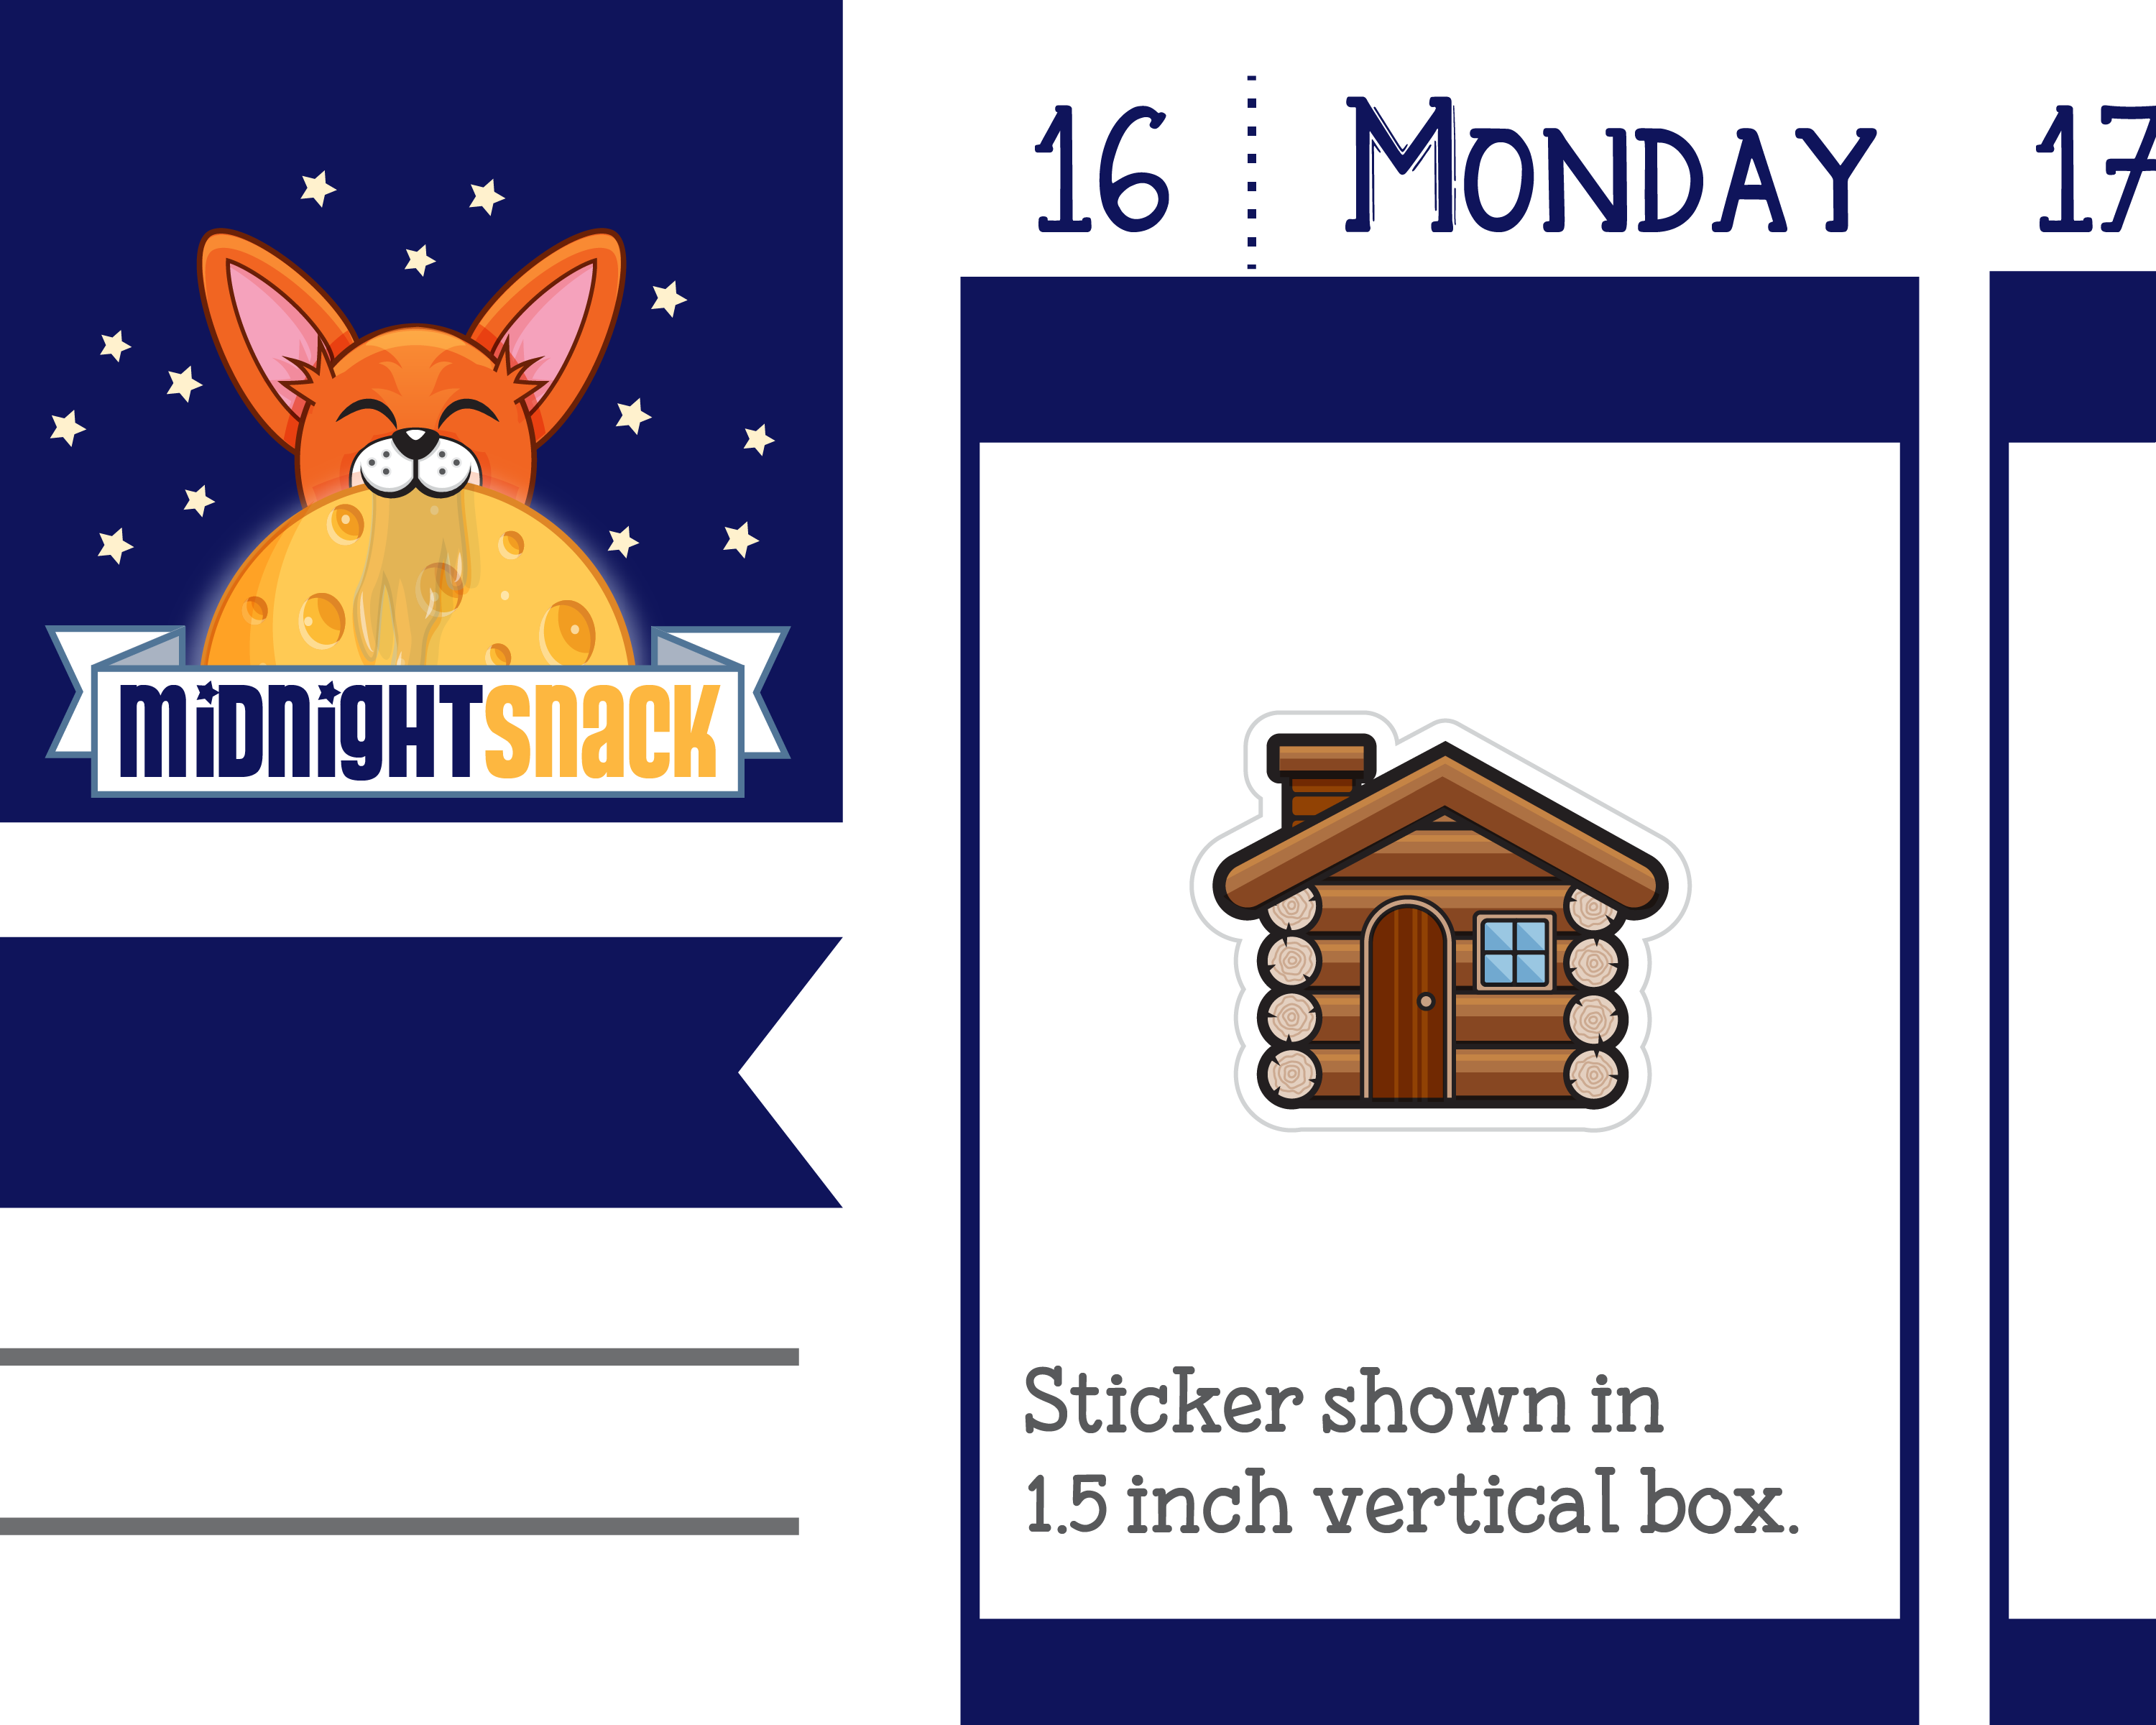 Log Cabin Icon: Outside Fun Planner Stickers Midnight Snack Planner